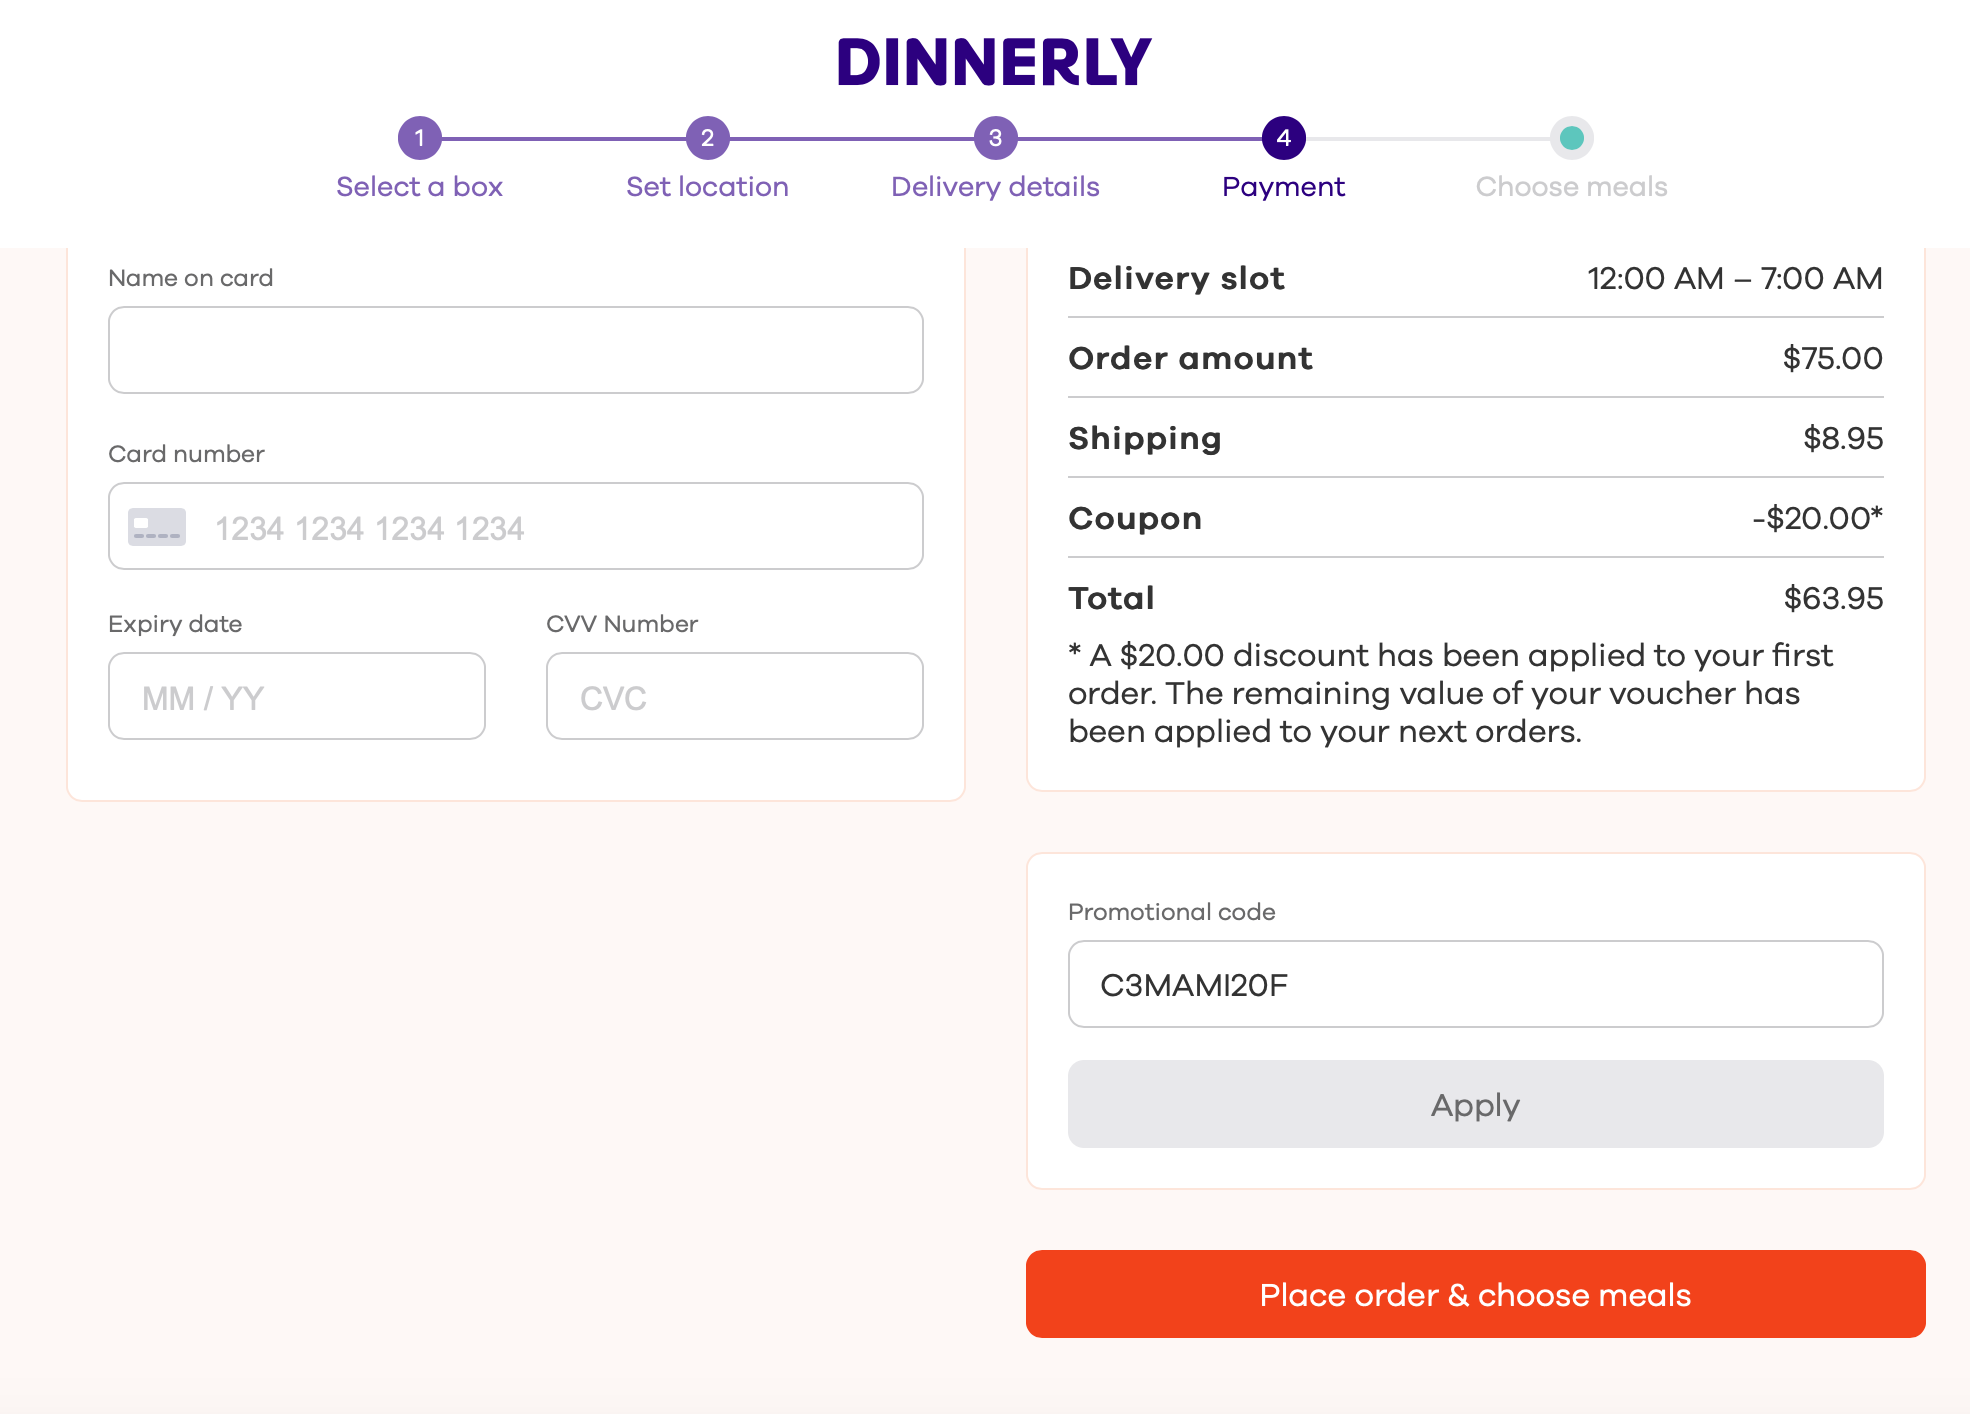 TESTED: Our Honest Dinnerly Review 2020